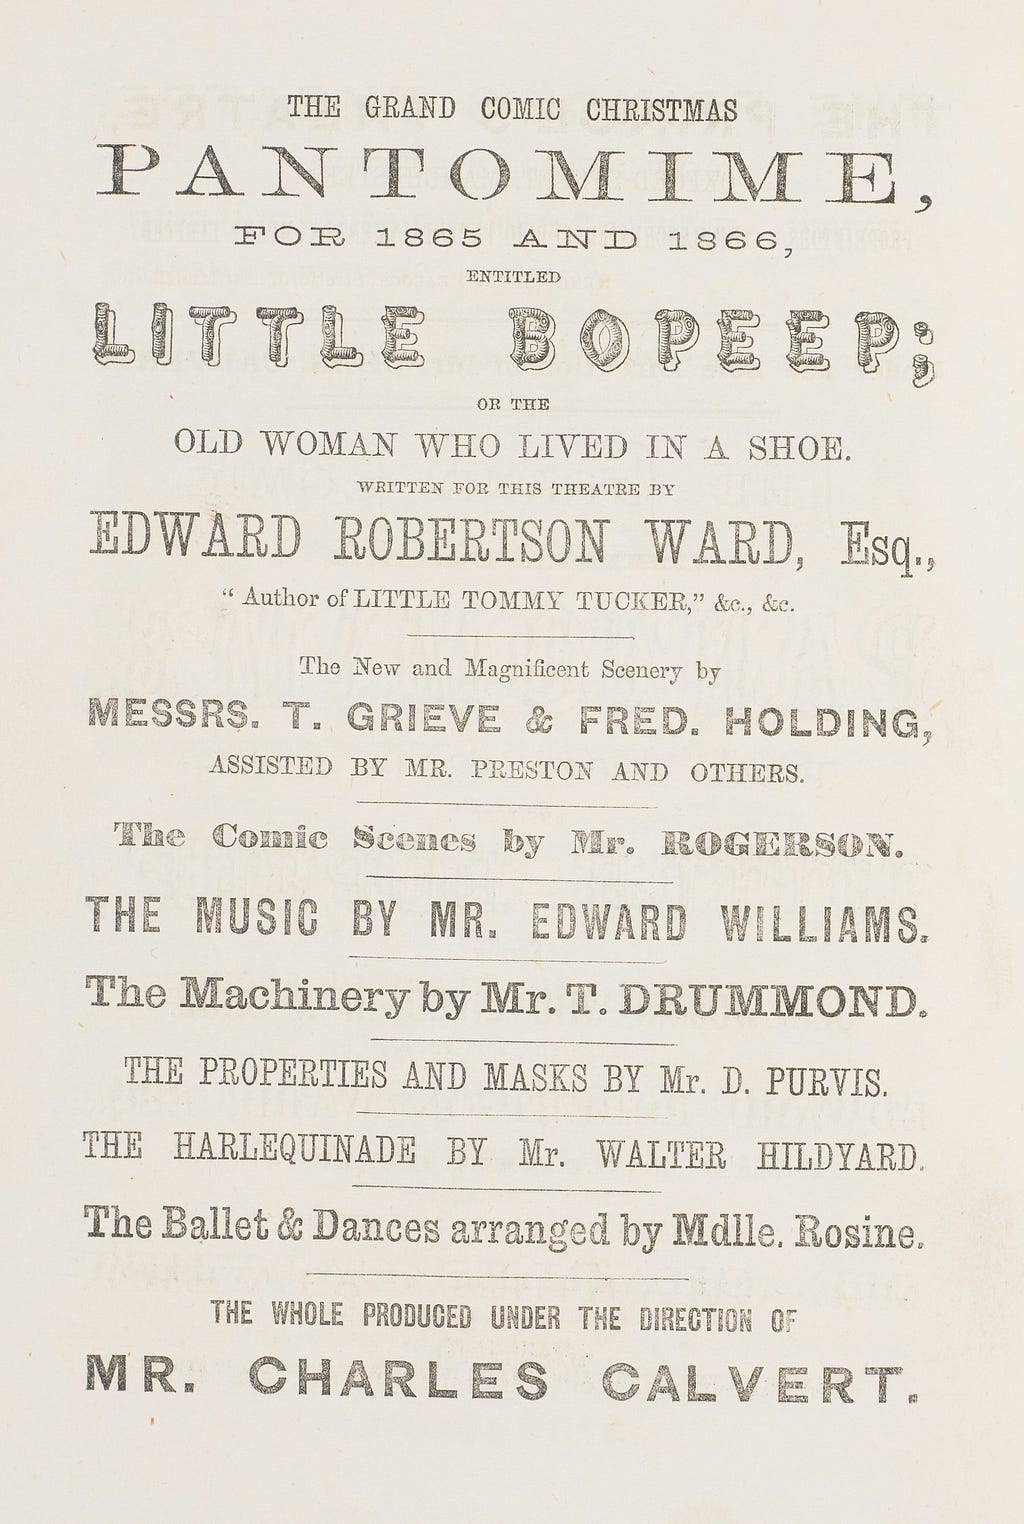 List, in a variety of fonts, giving the names of backstage personnel for a production of the pantomime ‘Little BoPeep’.